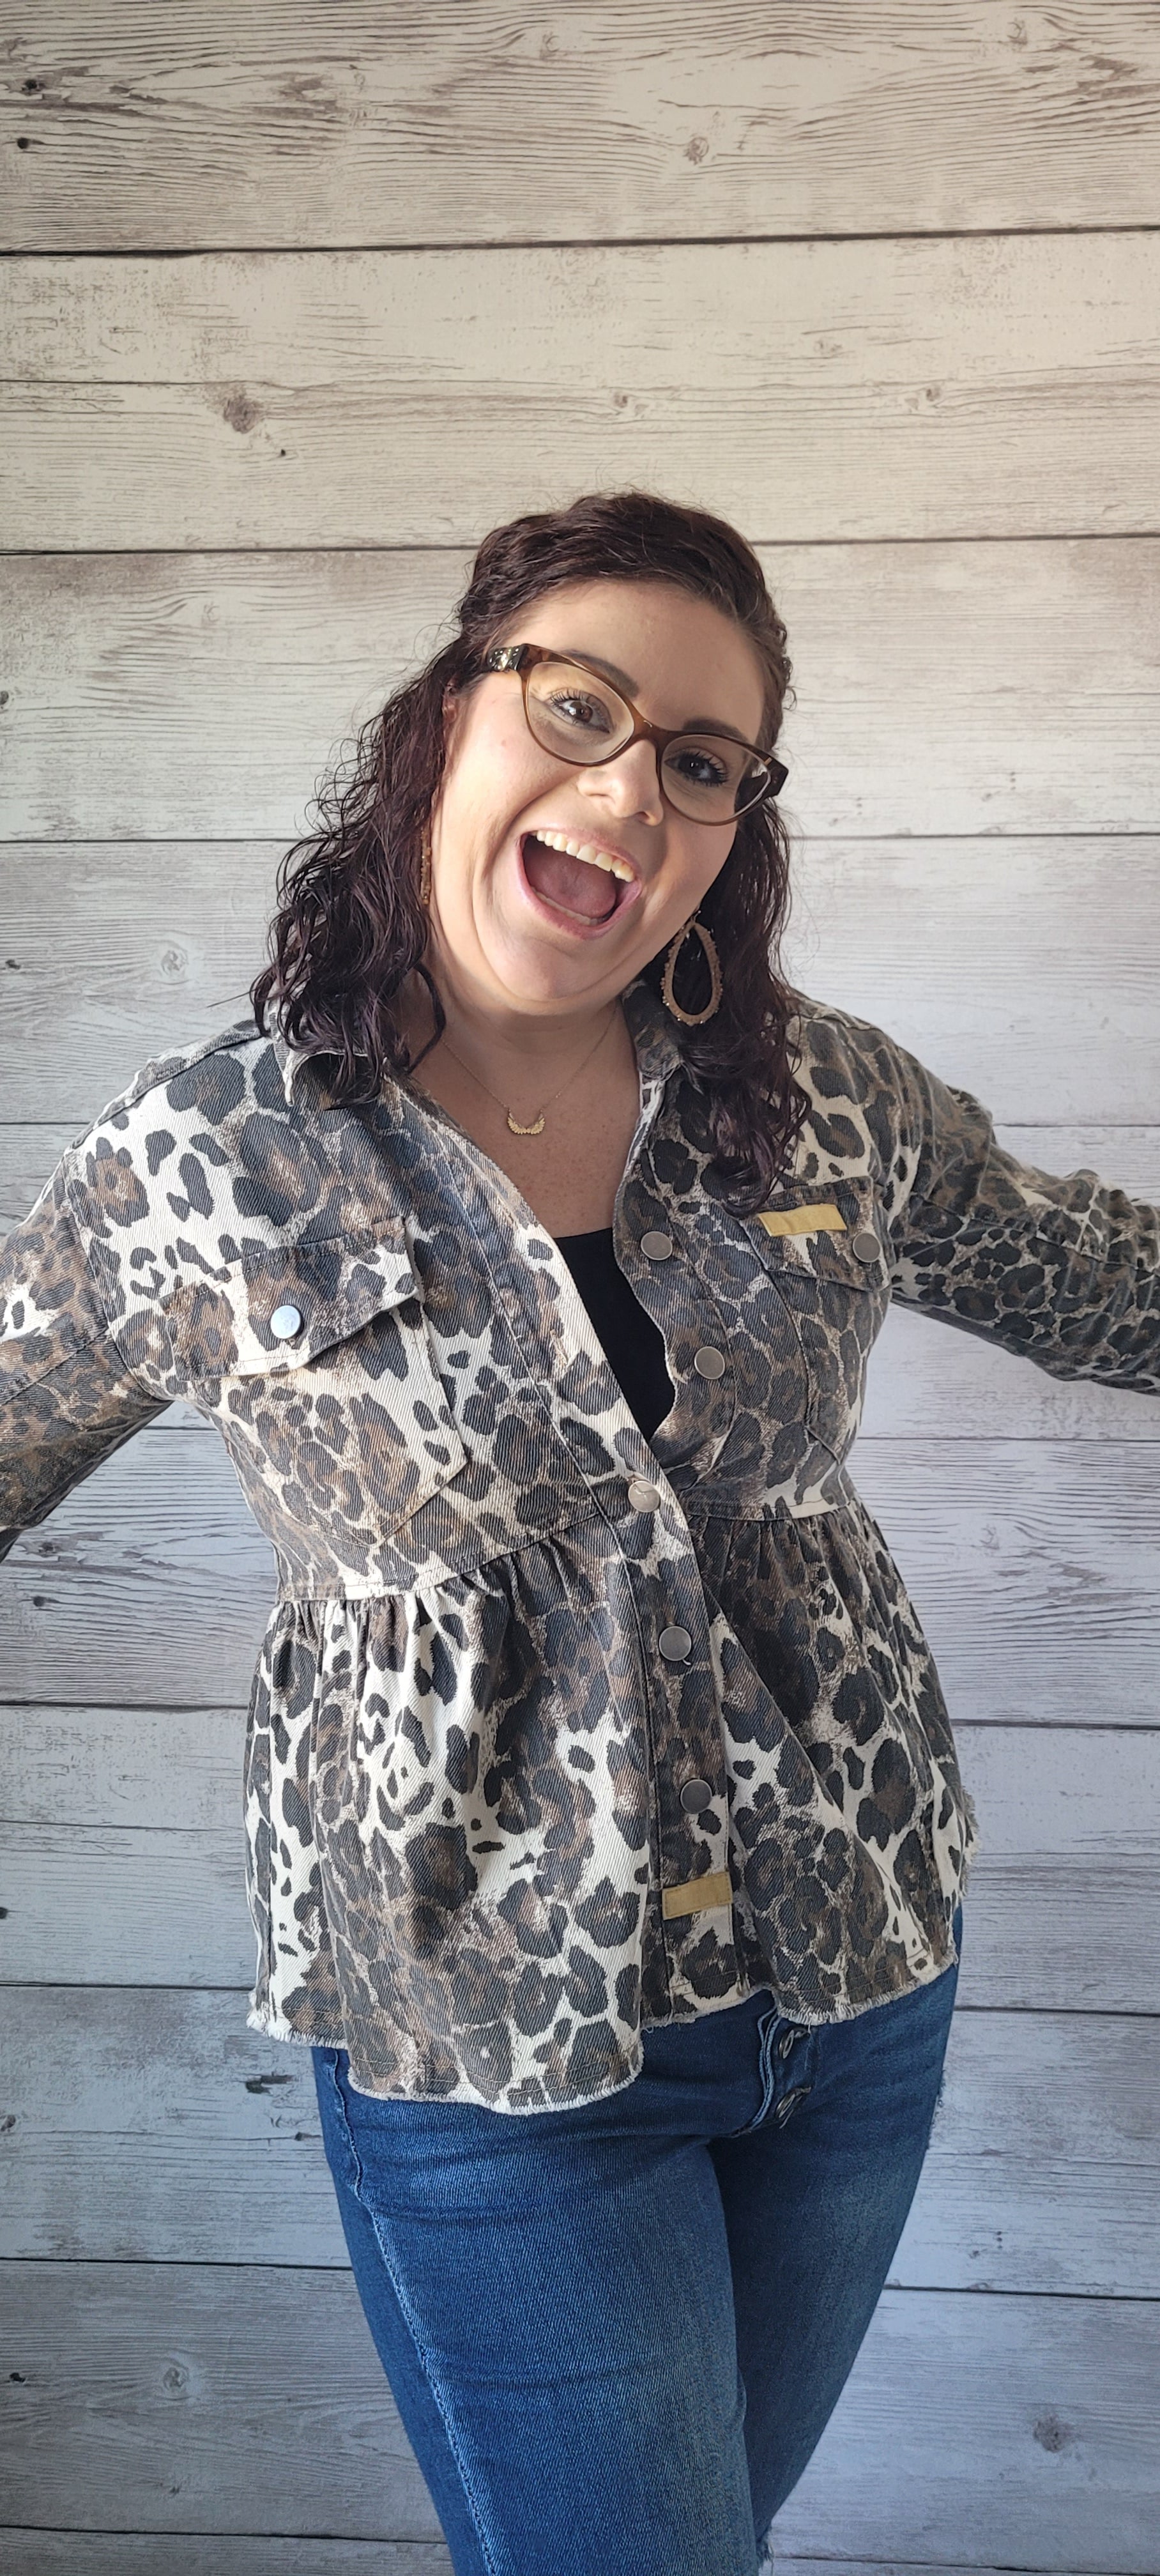 Go wild in our stunning "Felicia" jacket! This cozy-yet-chic piece is designed with a fierce leopard print, bust pockets, and metal buttons on the front closure to give your look some serious attitude. Button cuff long sleeve keeps you looking cool, while the peplum shaping gives you a flattering finish. Suit up and show the world who's boss! Sizes small through large.